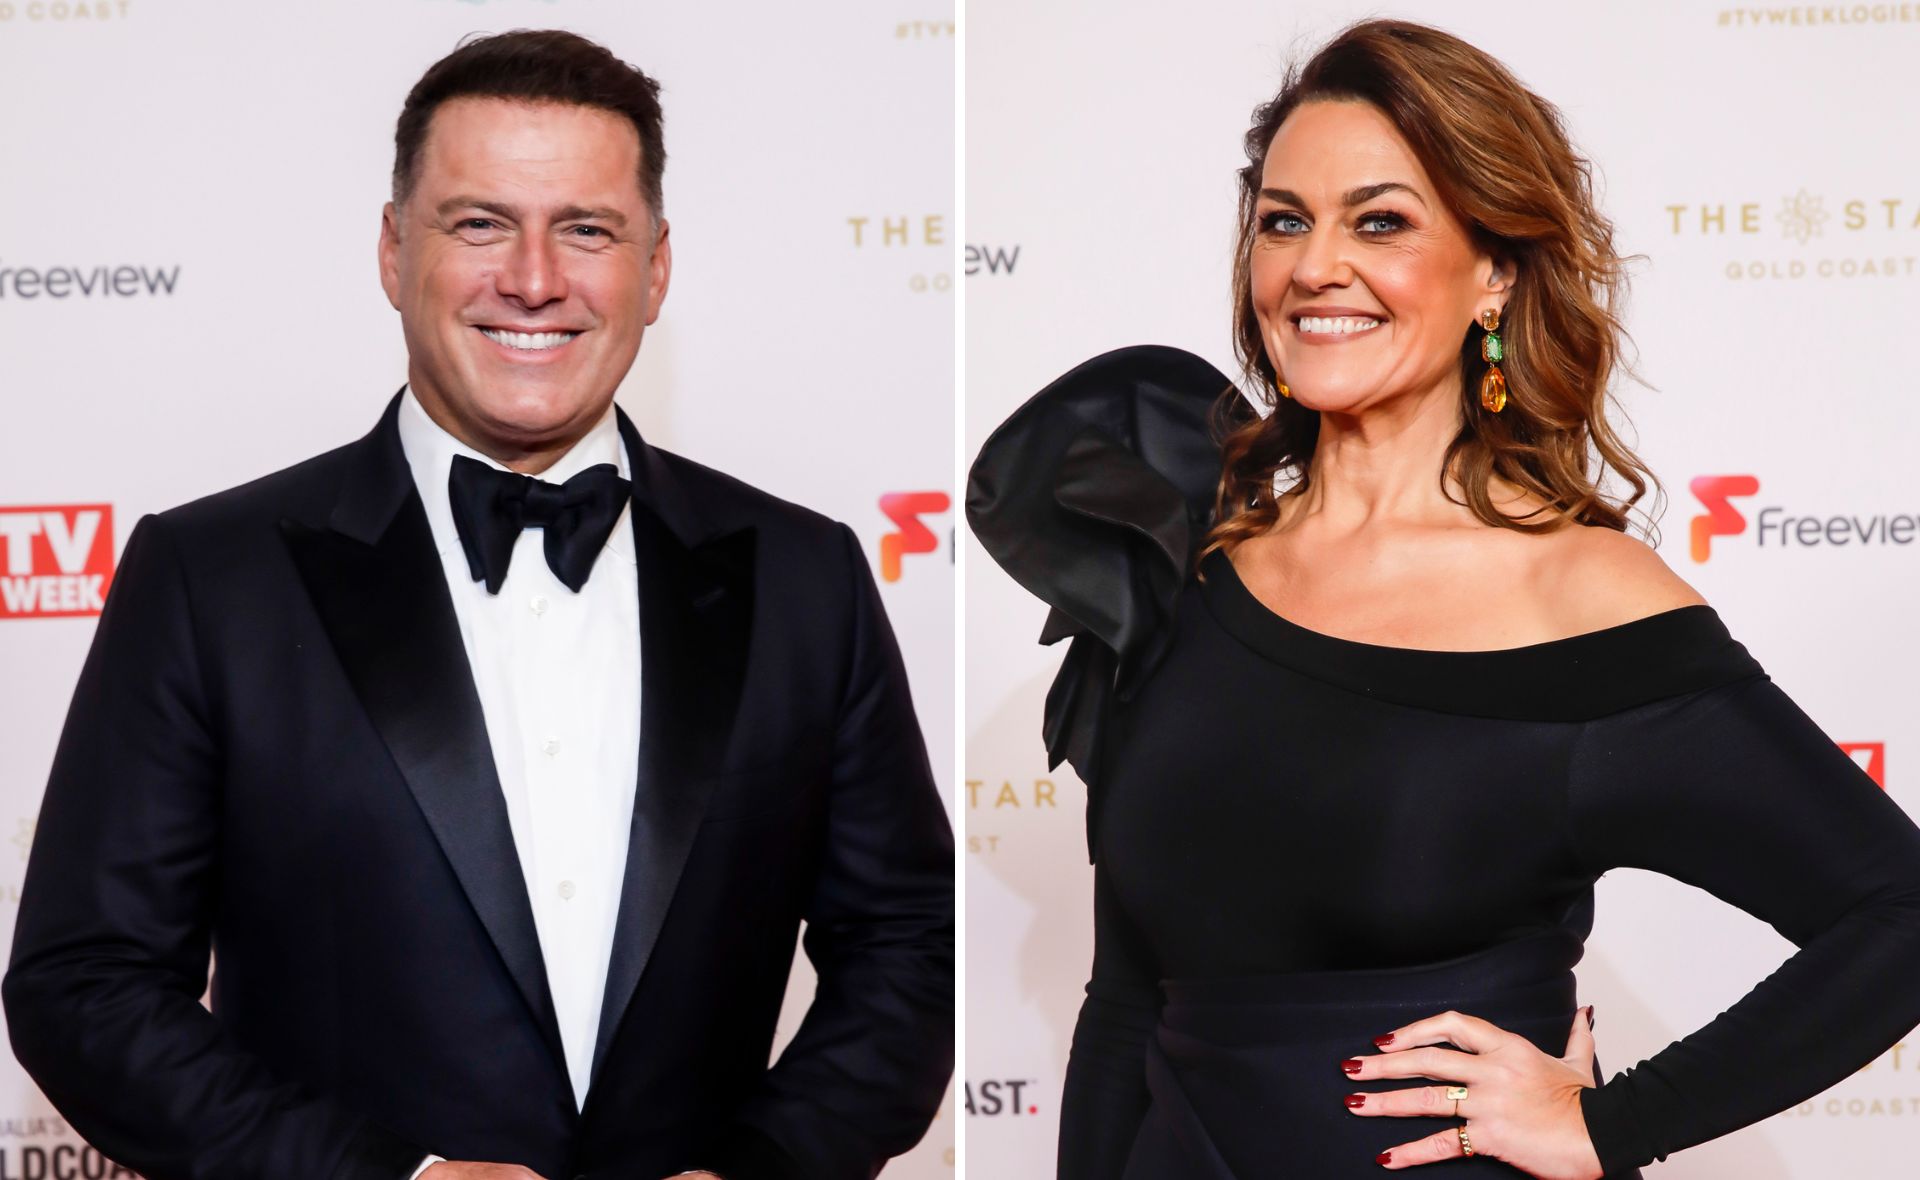 EXCLUSIVE: Our next golden duo? Karl Stefanovic and Chrissie Swan’s TV plans revealed